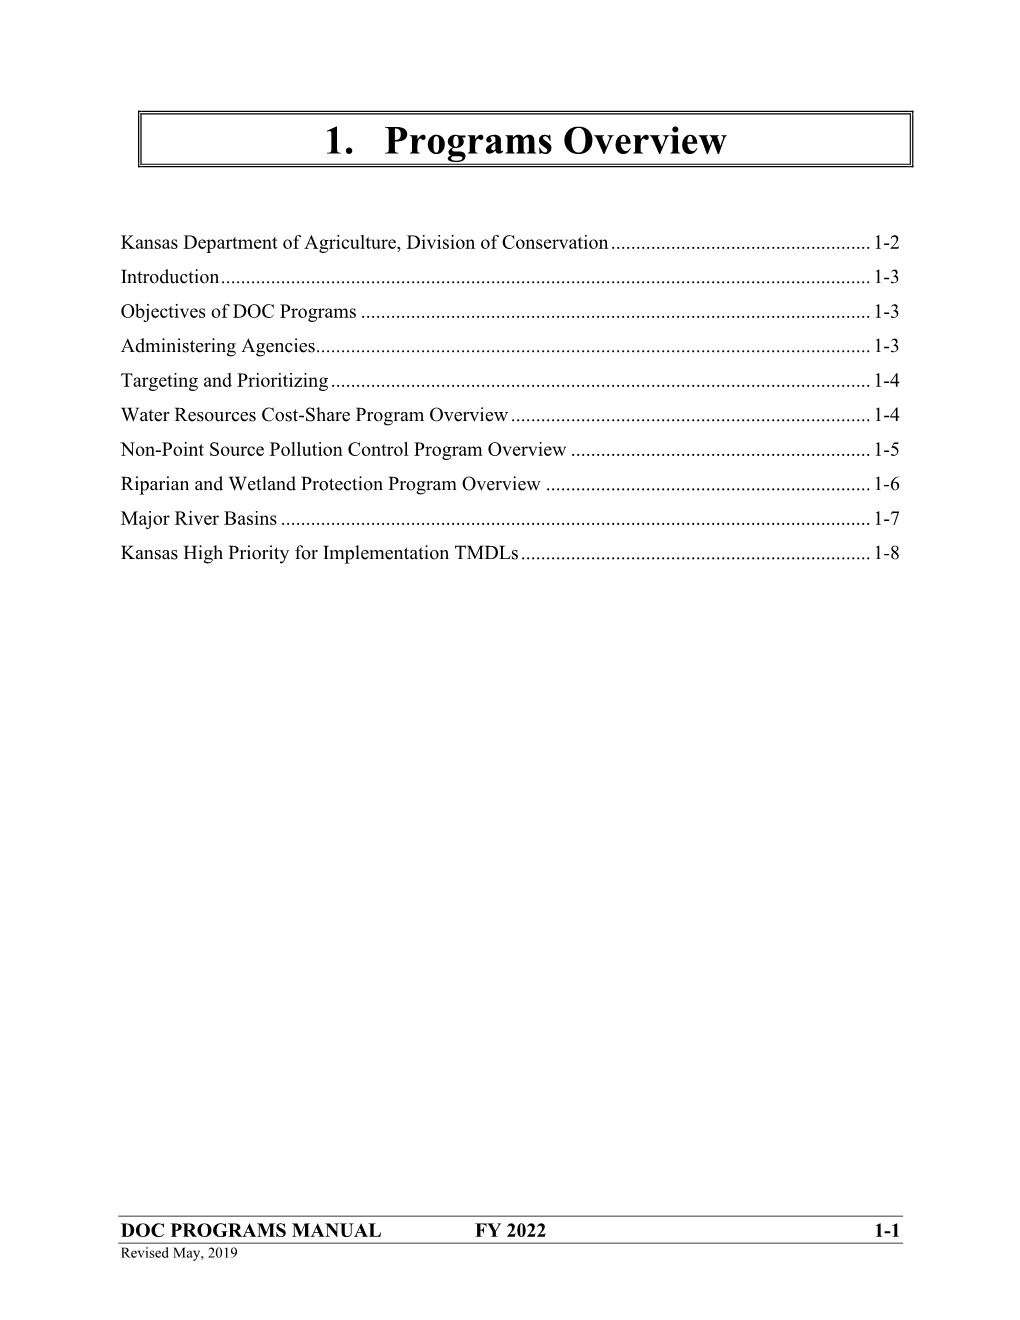 PROGRAMS MANUAL FY 2022 1-1 Revised May, 2019 Kansas Department of Agriculture, Division of Conservation